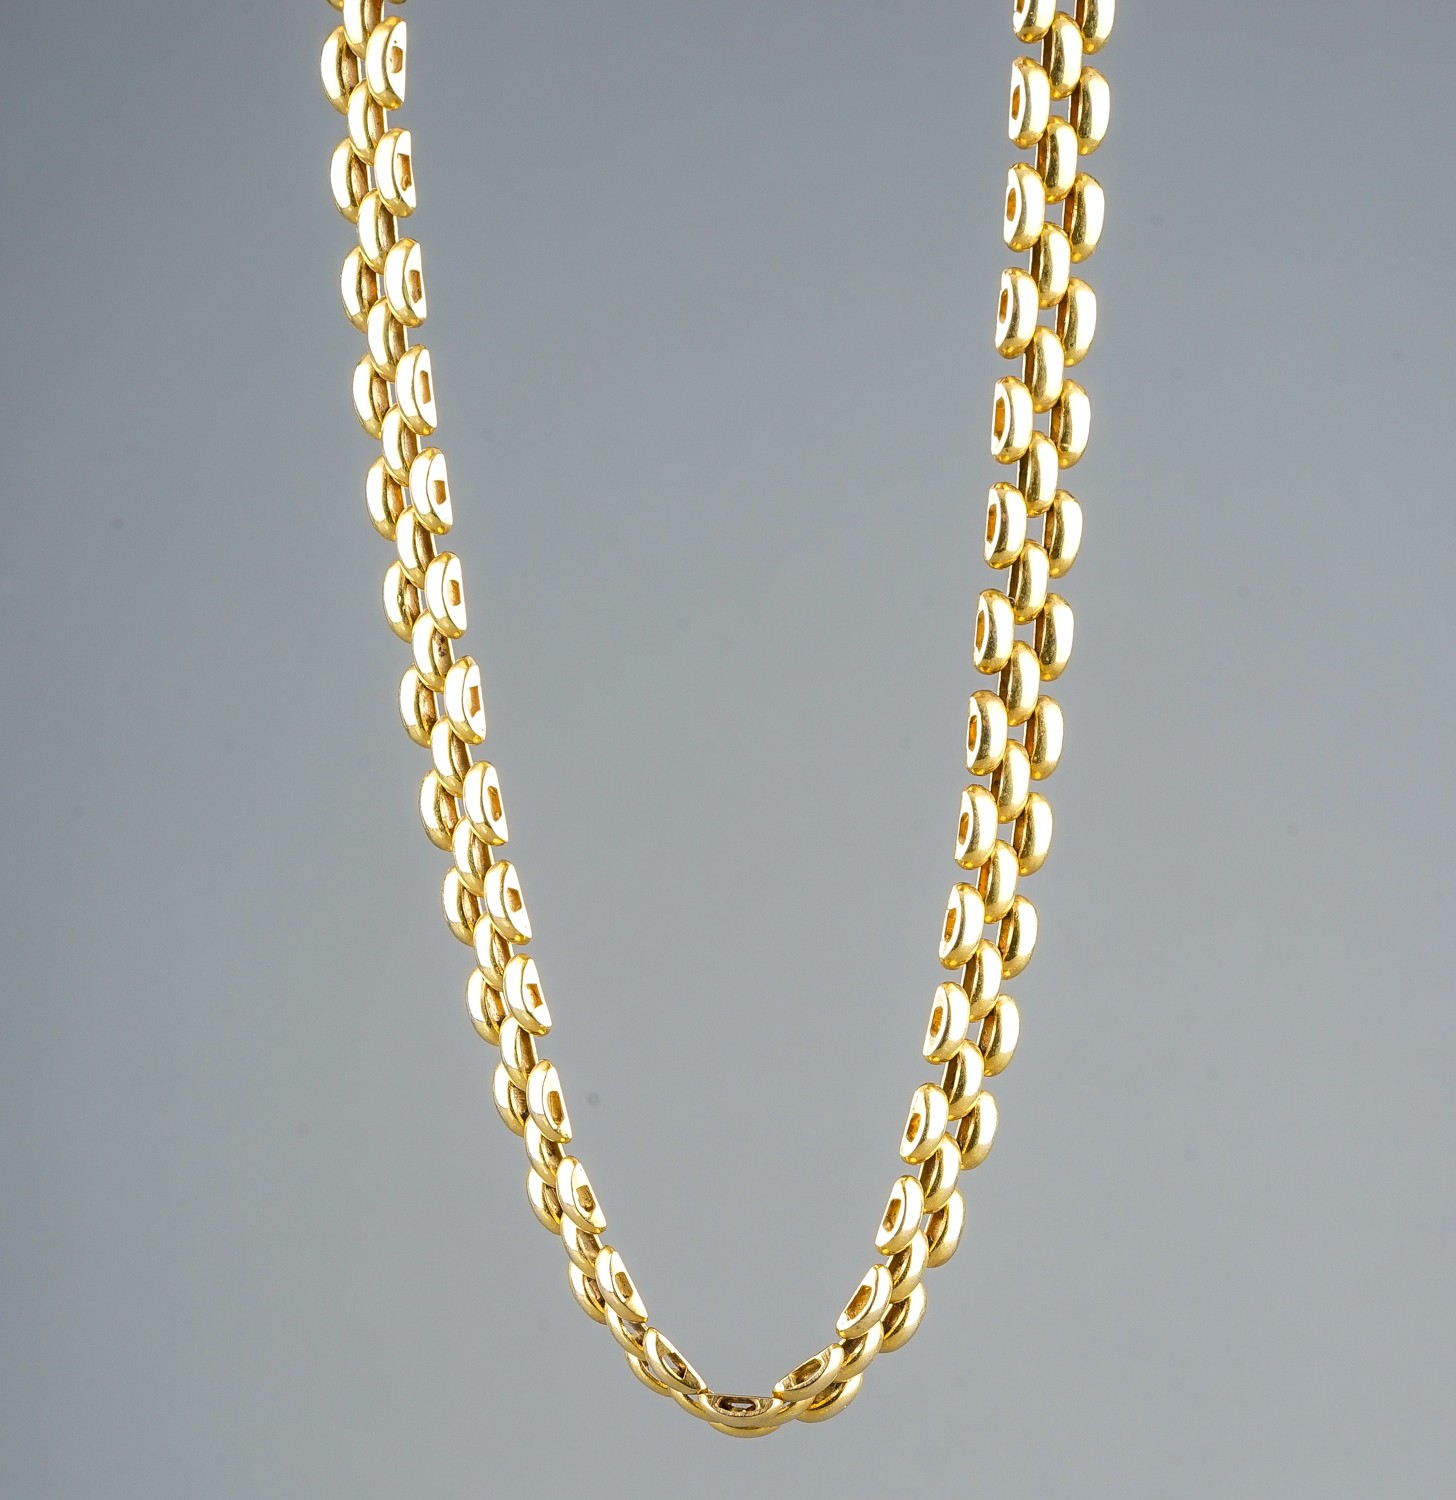 An Italian 9k yellow gold gate-link necklace and bracelet, the necklace approx 41cm long, gross - Image 6 of 10